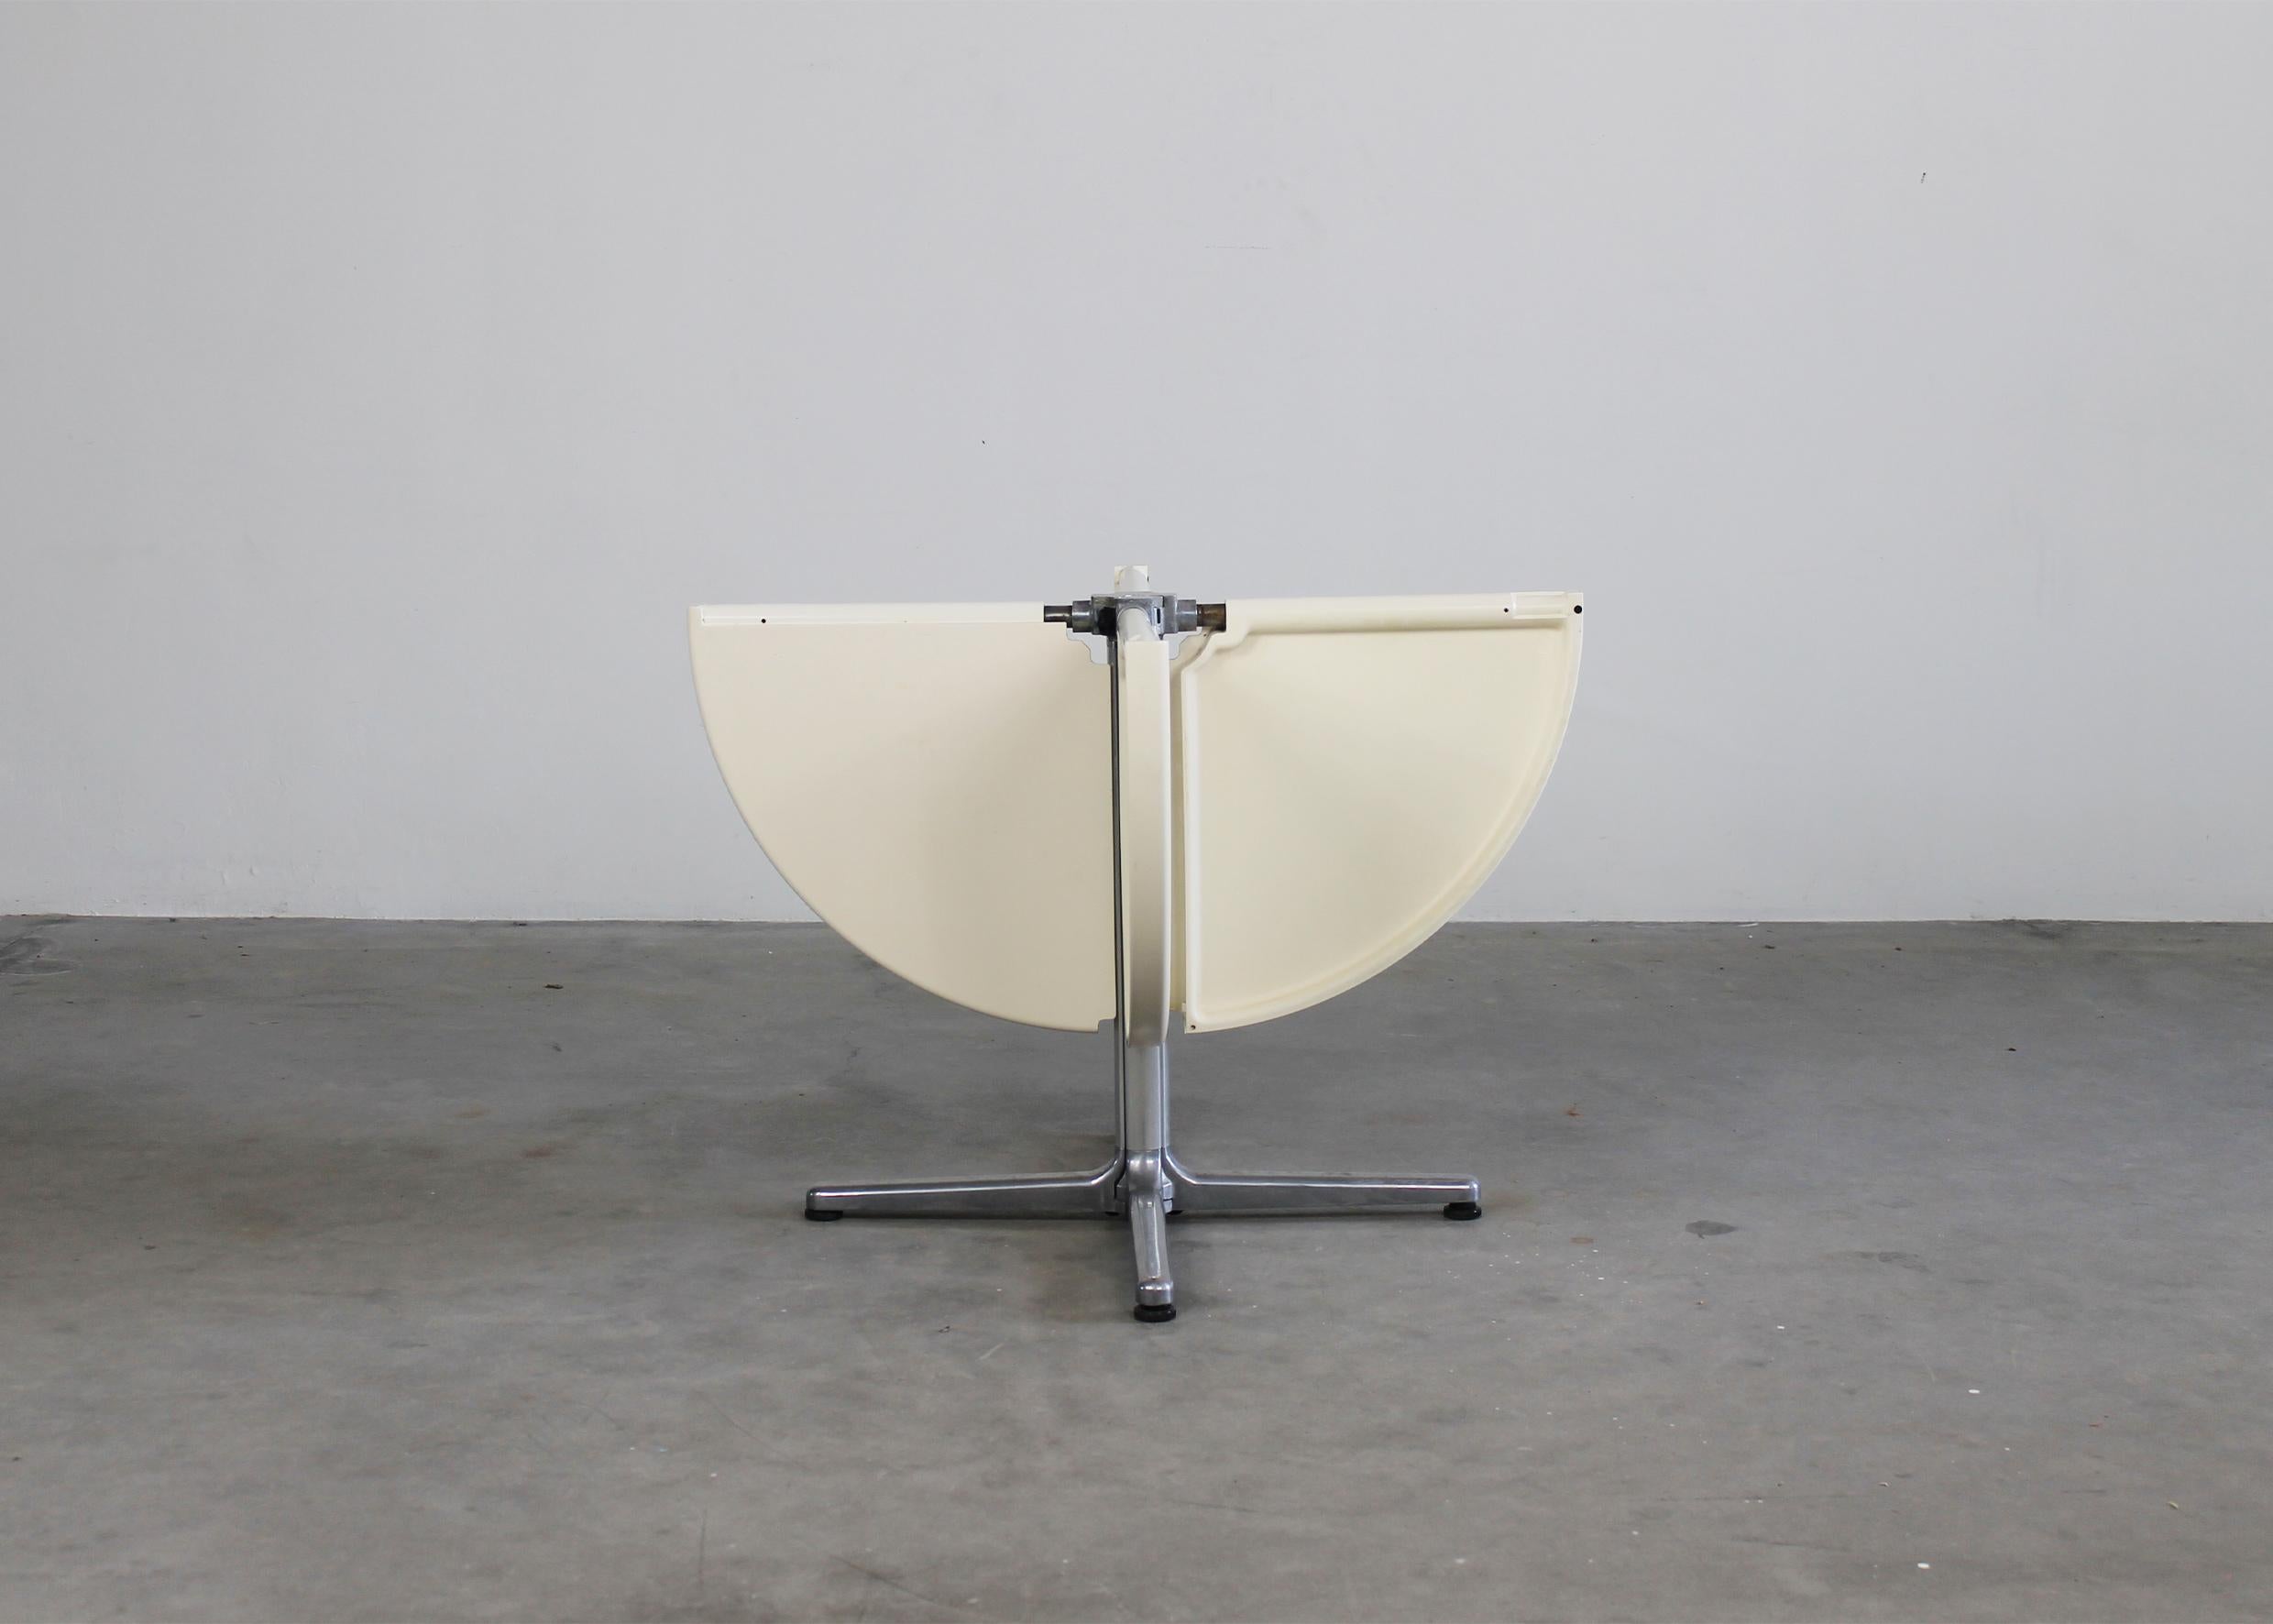 Round Plona folding table with die-cast aluminum base with wheels and table top in white polyurethane.
Designed by Giancarlo Piretti and produced by Anonima Castelli in the 1970s.

(With the manufacturer's label) 

Giancarlo Piretti was born in